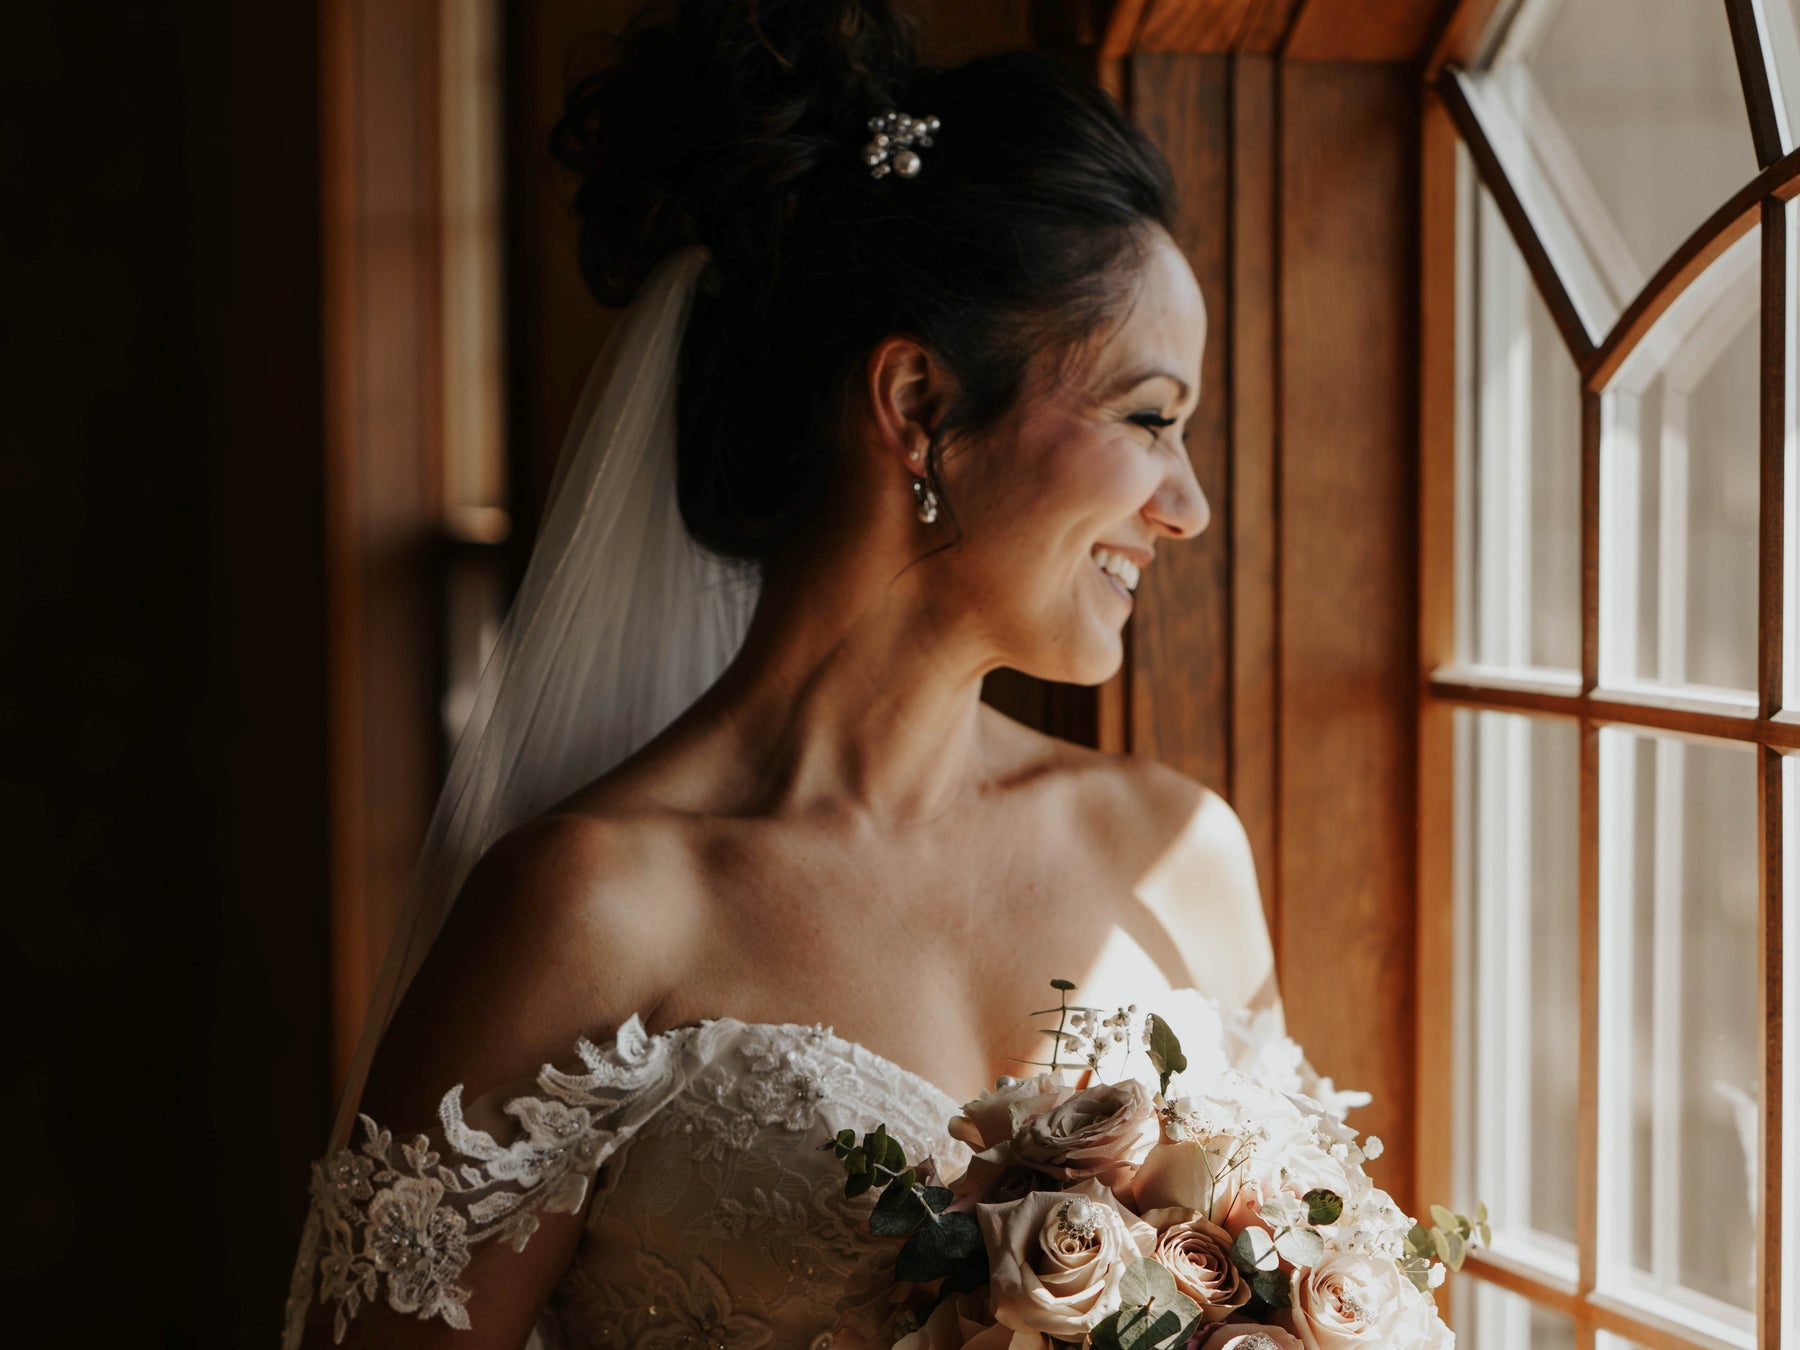 Bride standing next to a window holding a bouquet and wearing bespoke handmade jewellery